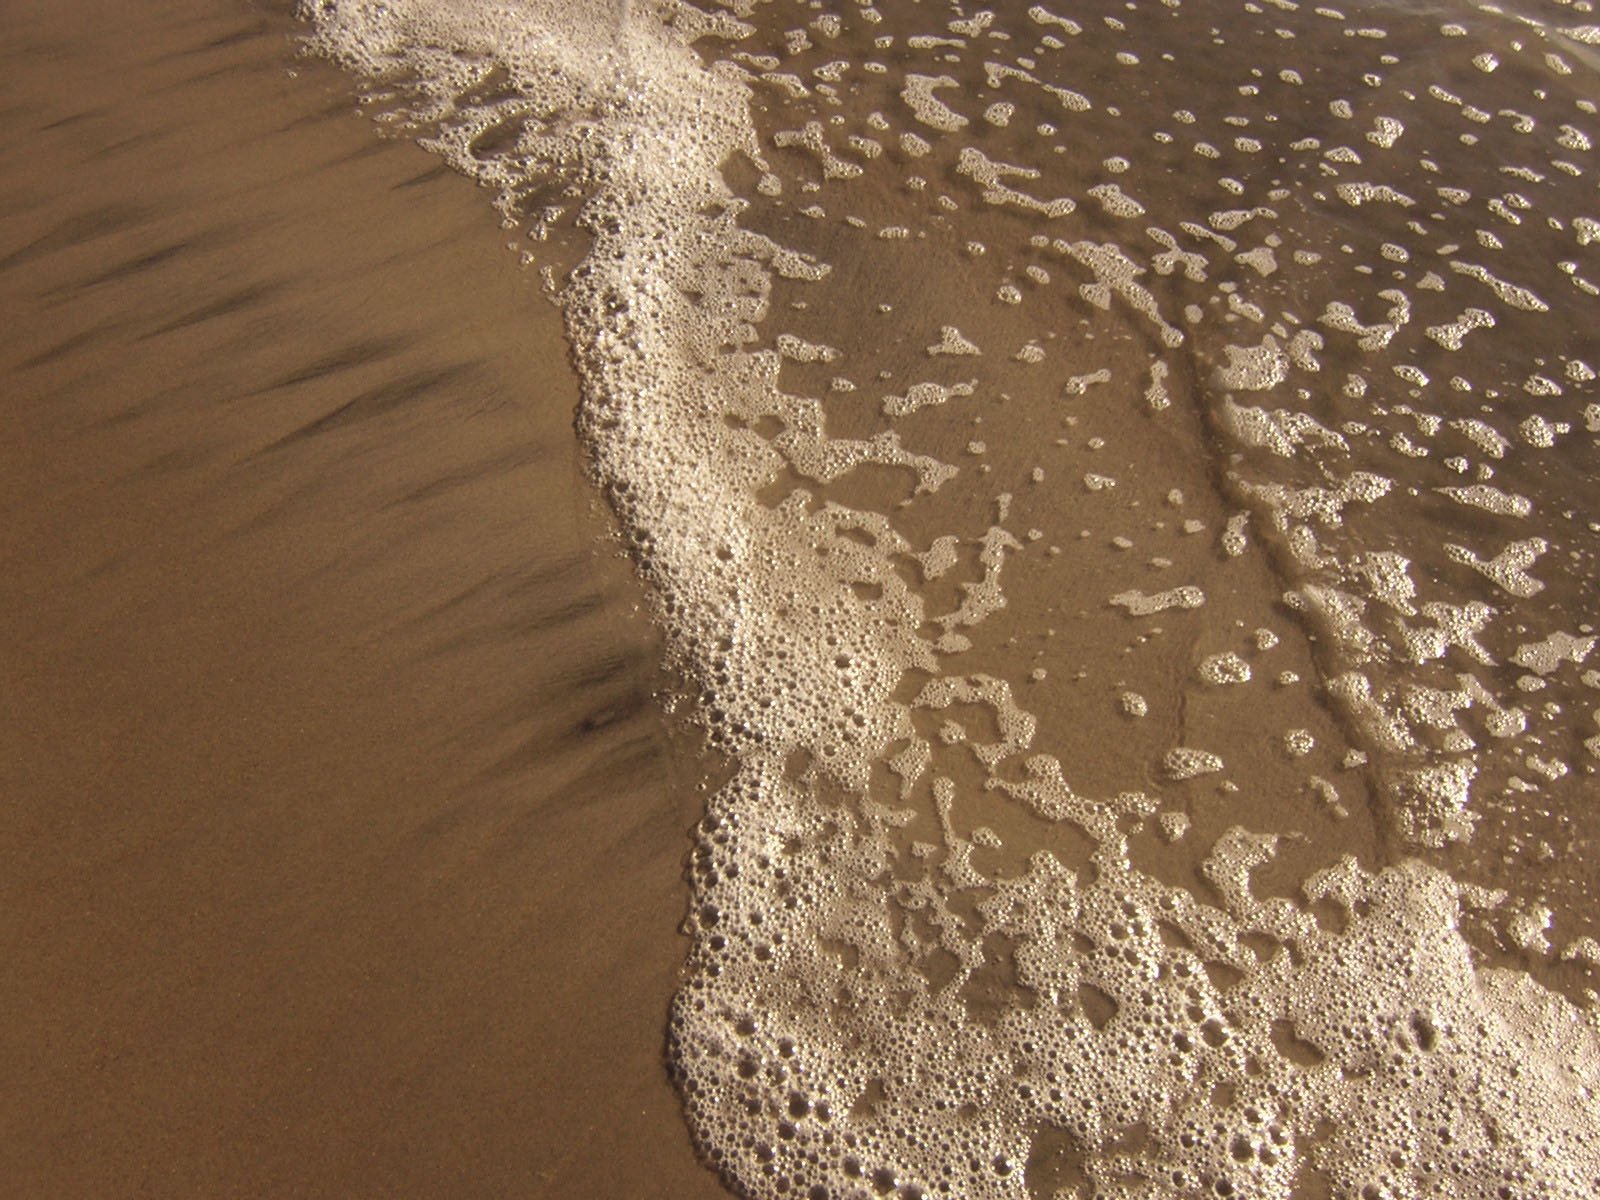 small waves coming in and out from a sandy beach